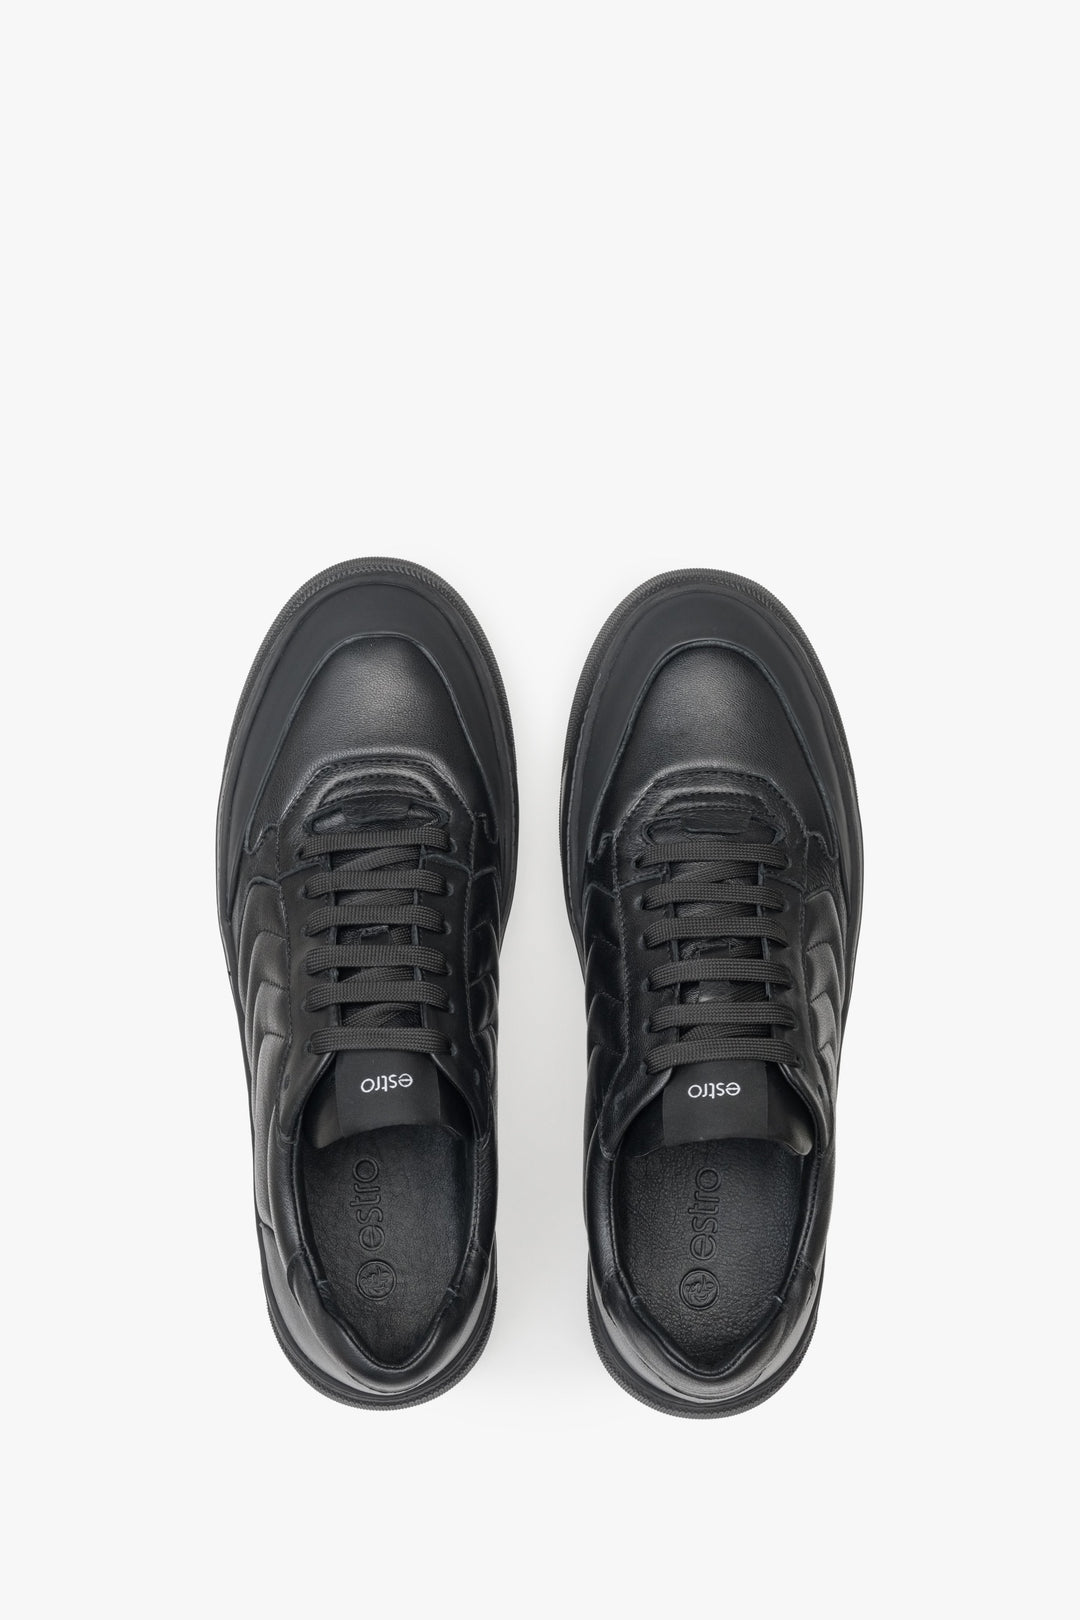 Low, lace-up men's sneakers made from genuine black leather by Estro - close-up of the upper part of the shoes.